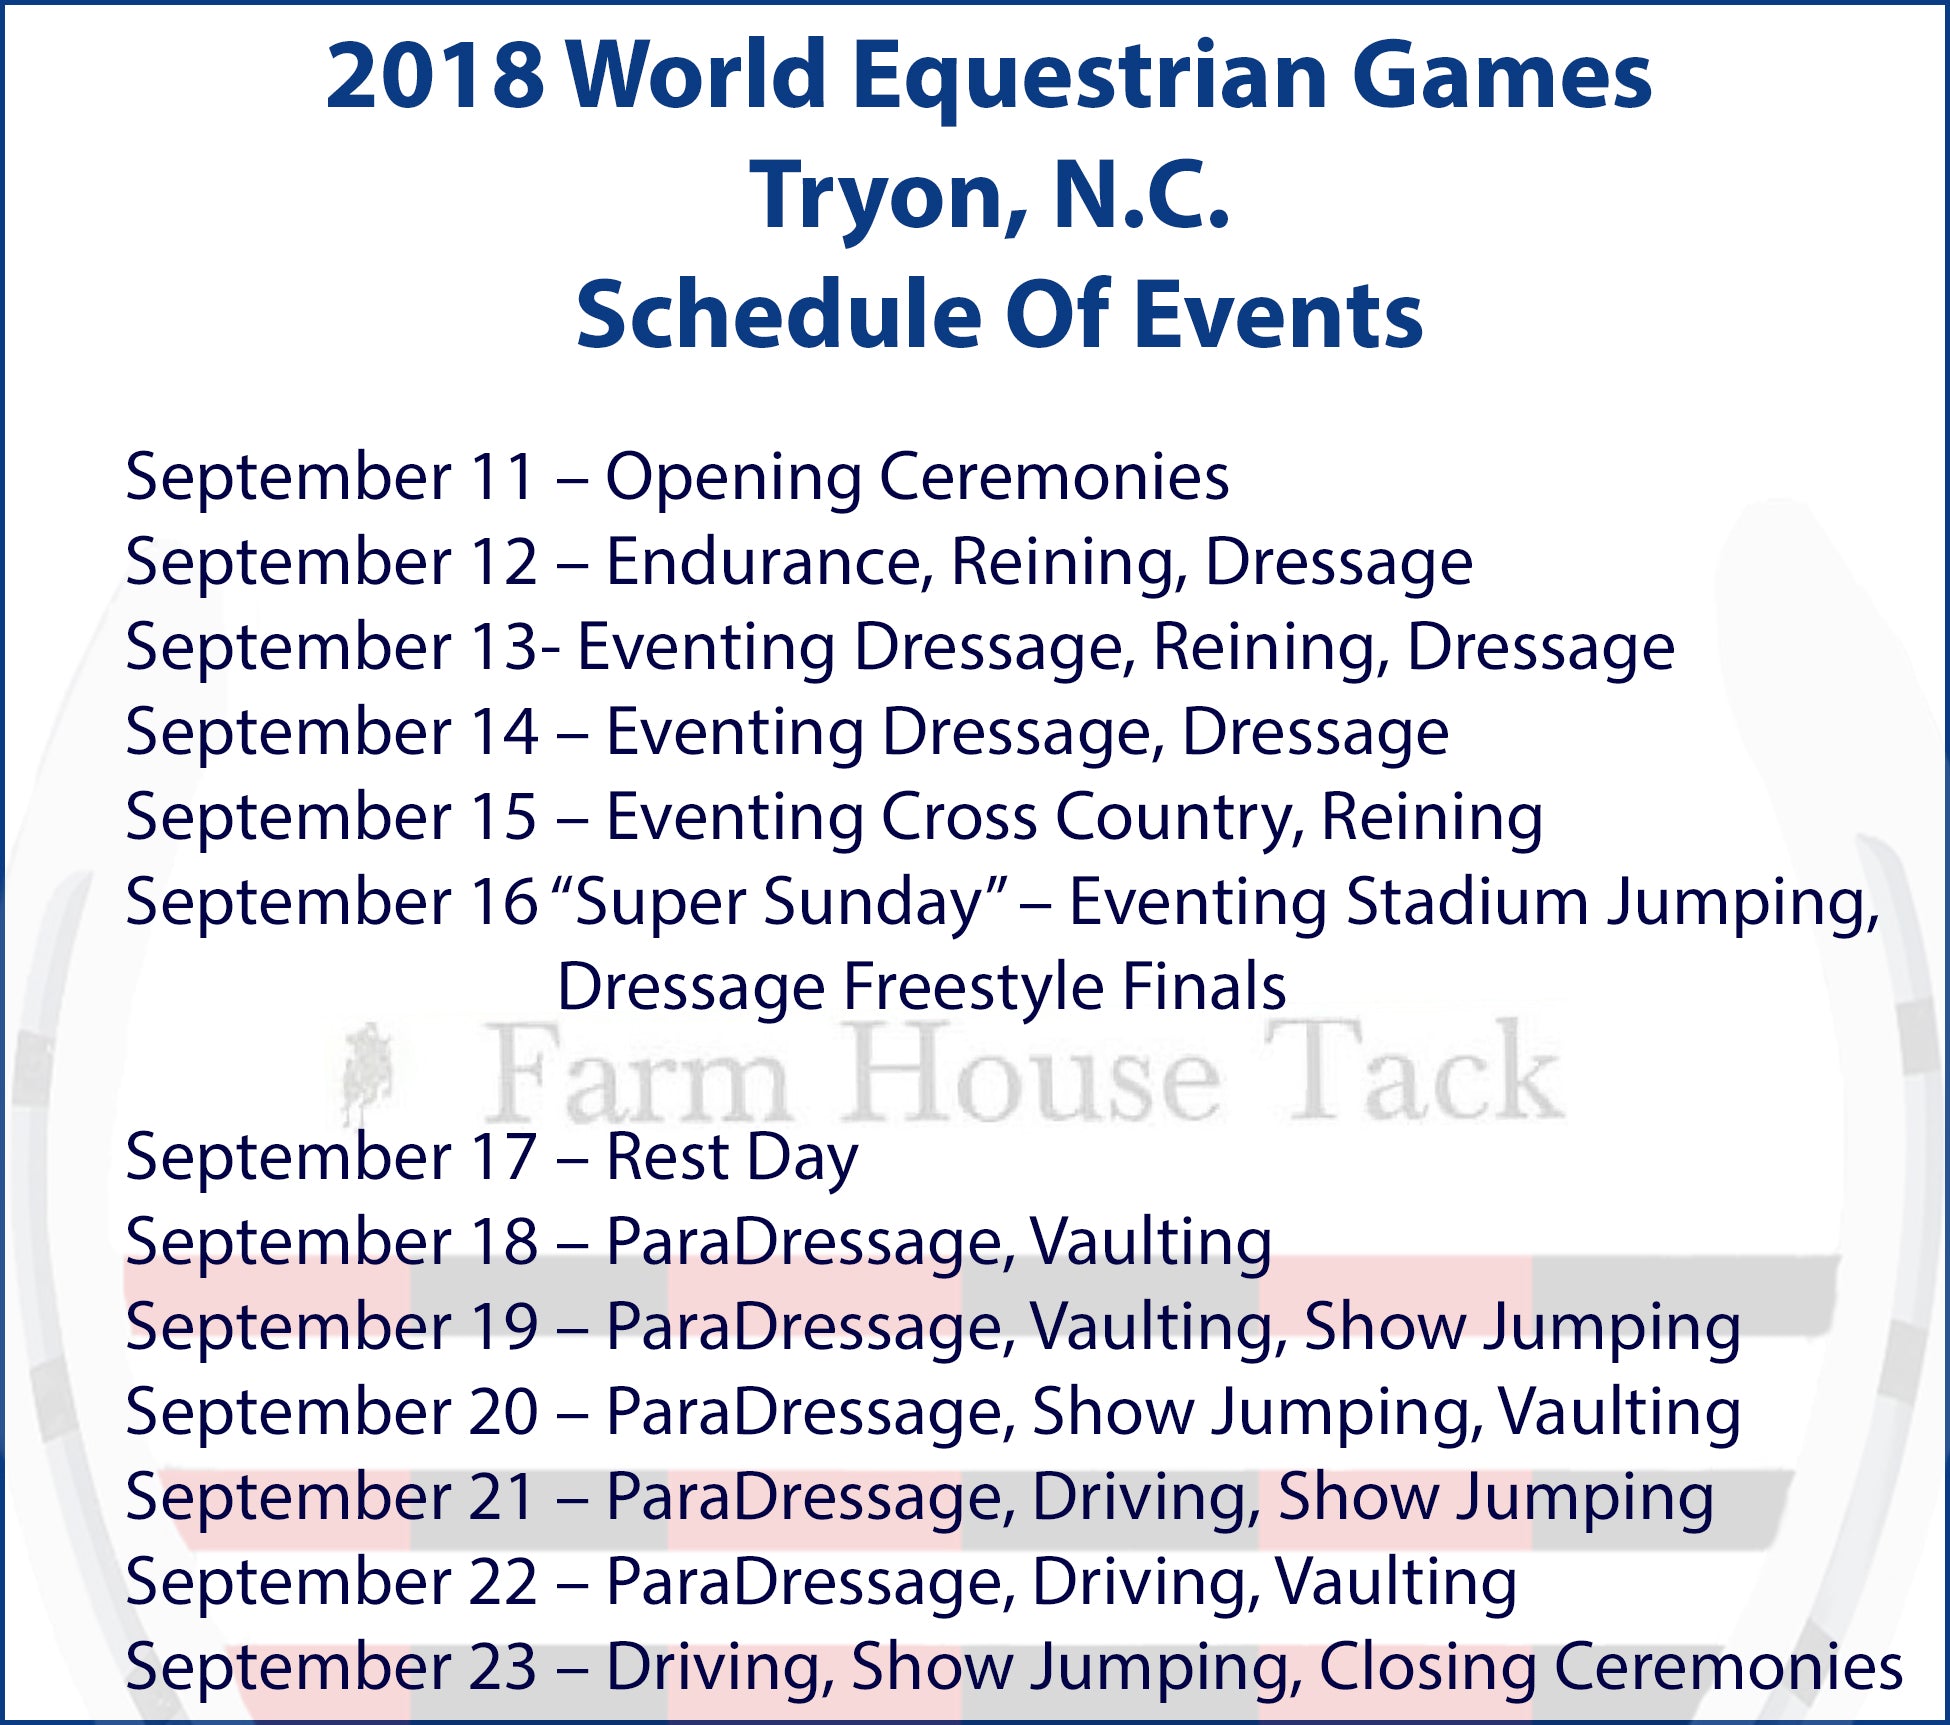 Official Schedule For 2018 World Equestrian Games - Tryon N.C.